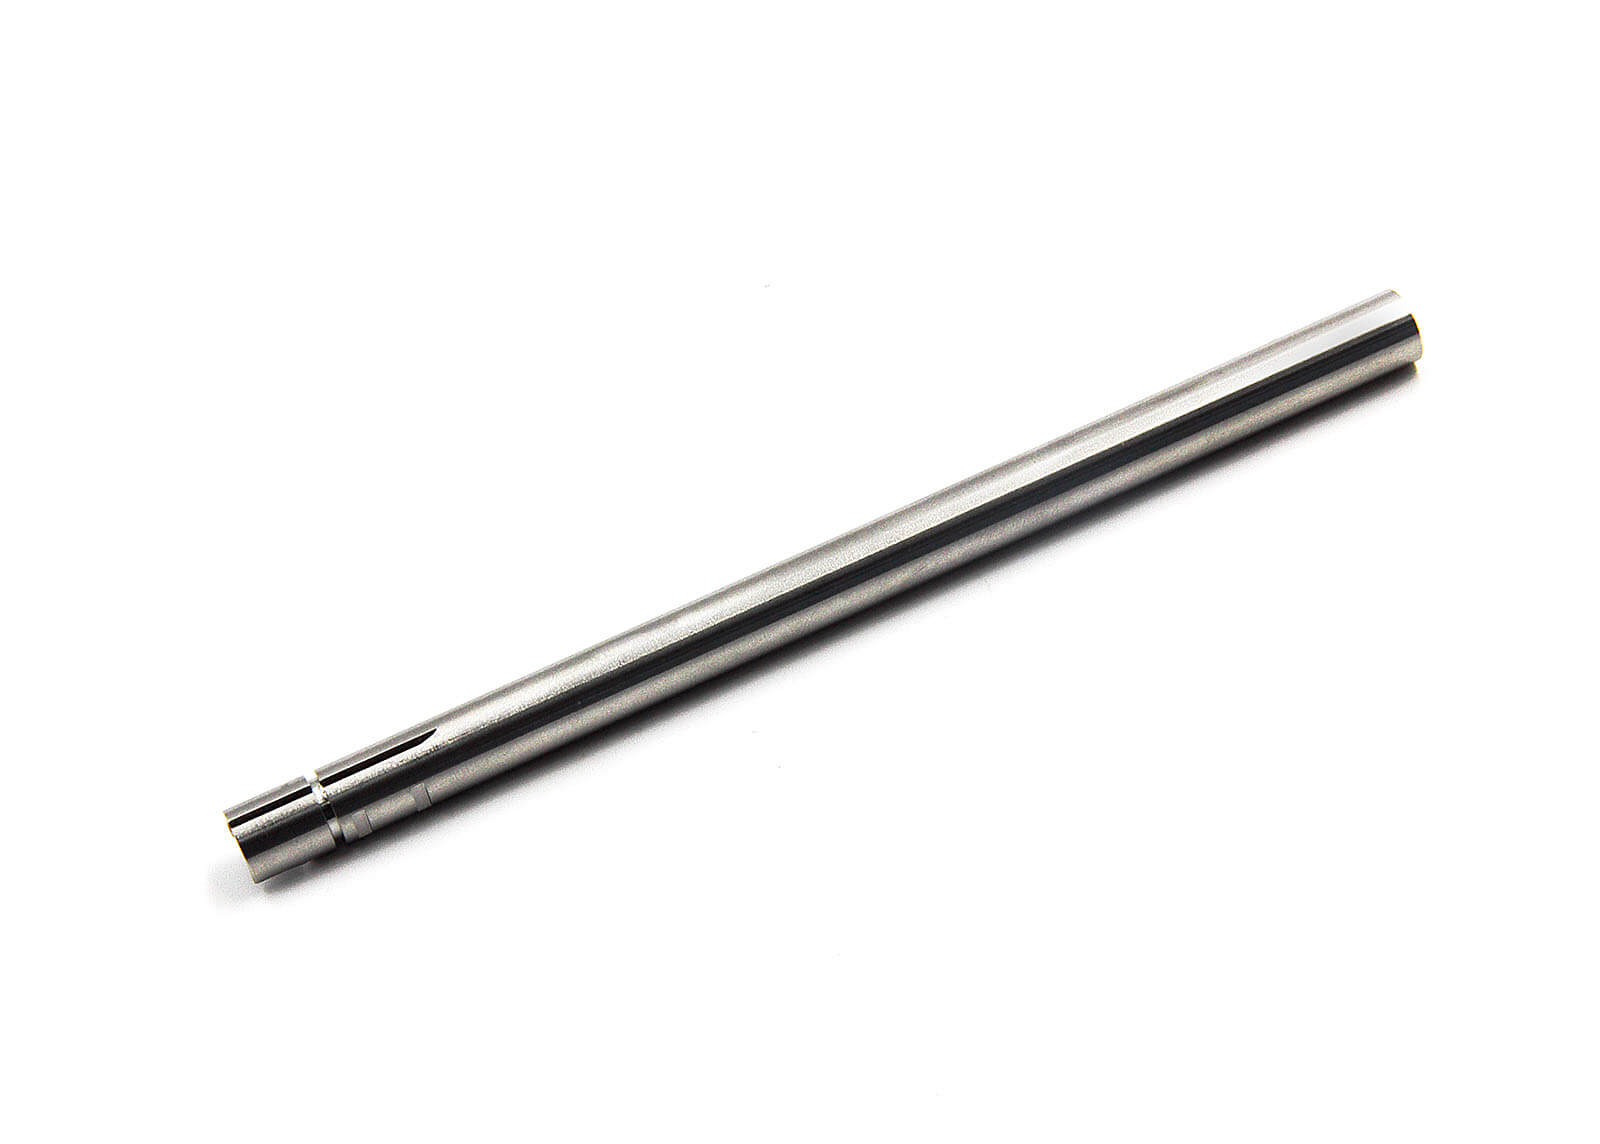 Stainless Steel 6.03mm Precision GBB Inner Barrel 138mm - Modify Airsoft Parts